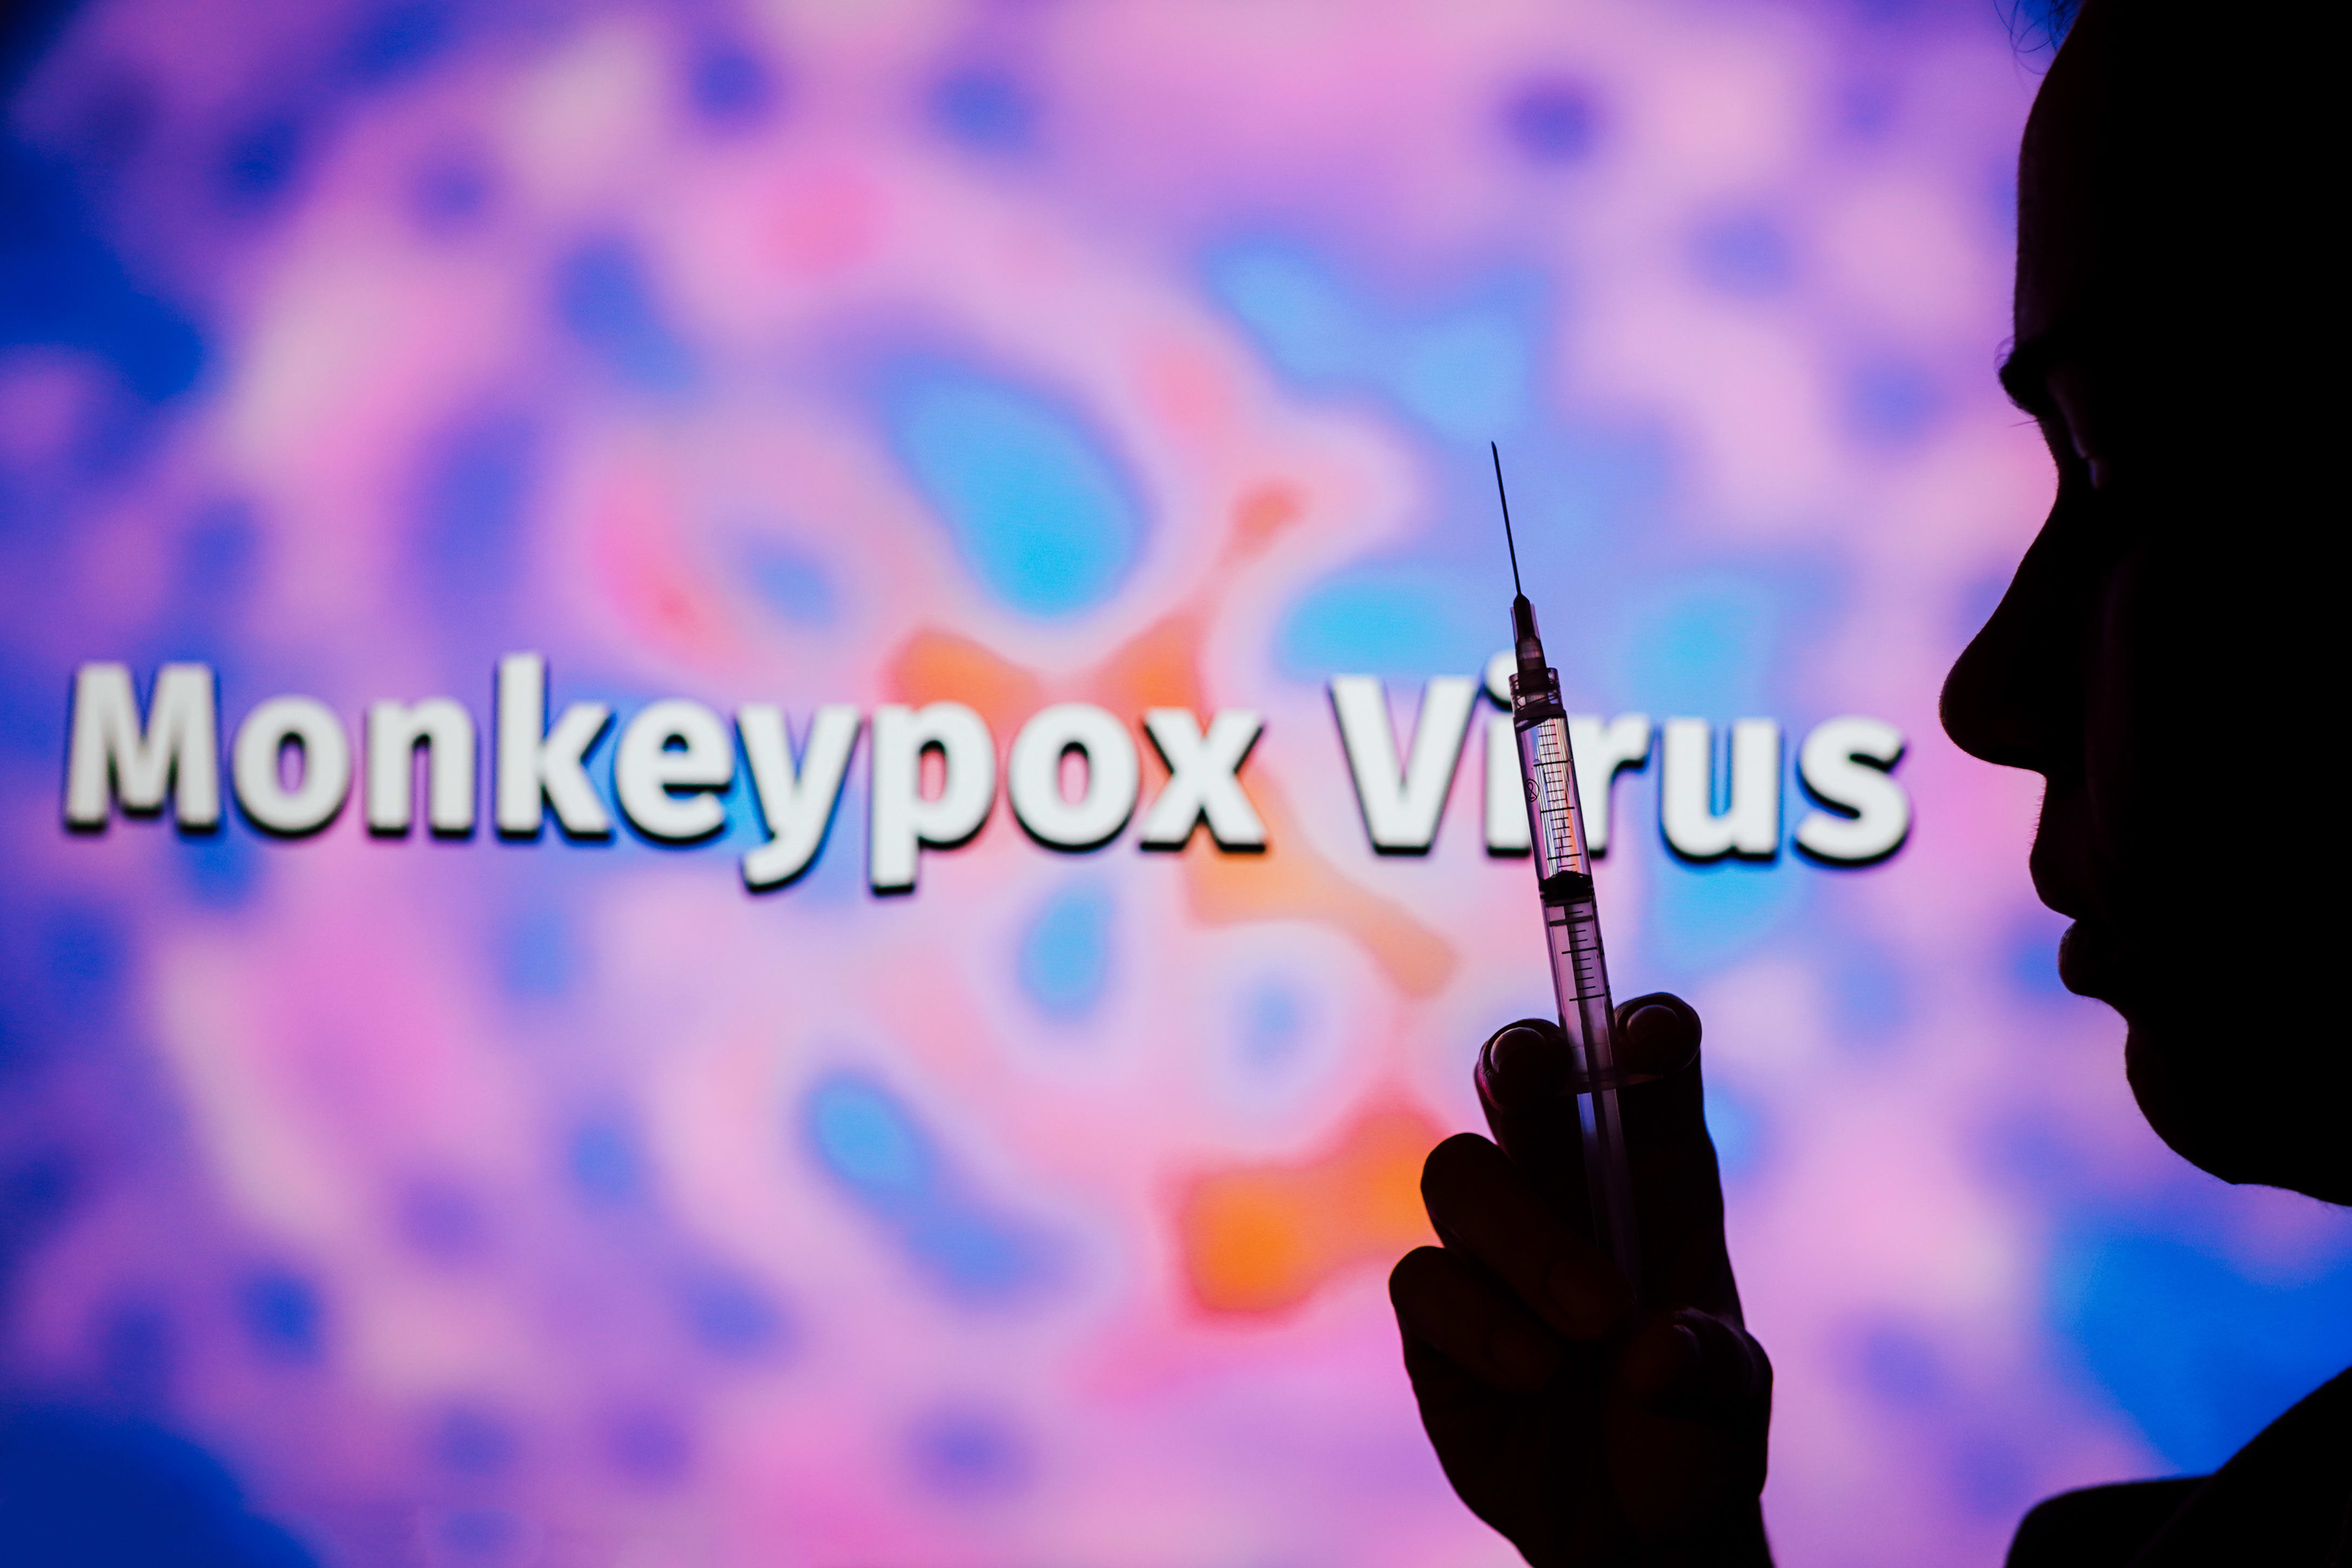 WHO says no urgent need for mass monkeypox vaccinations